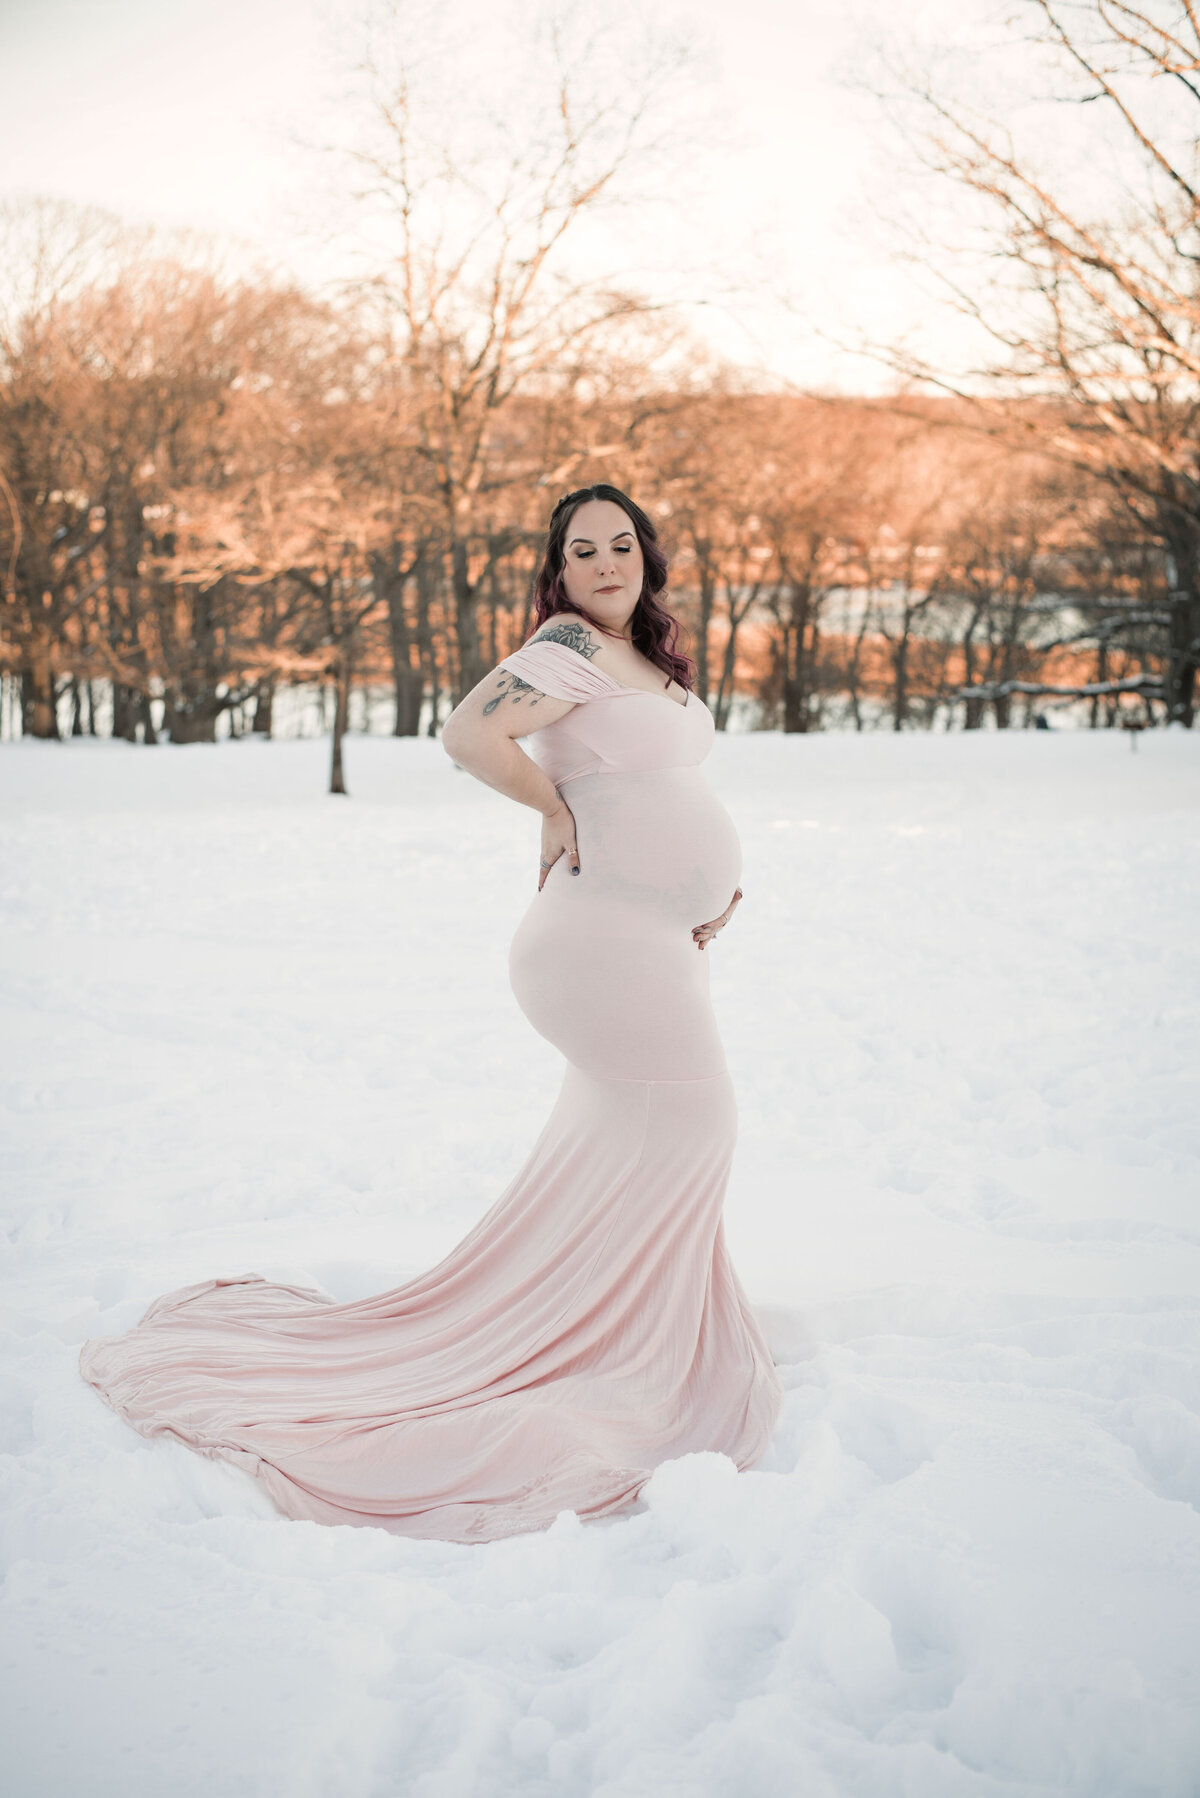 35 week pregnant lady wearing white fitted maternity gown holding baby bump standing in the snow